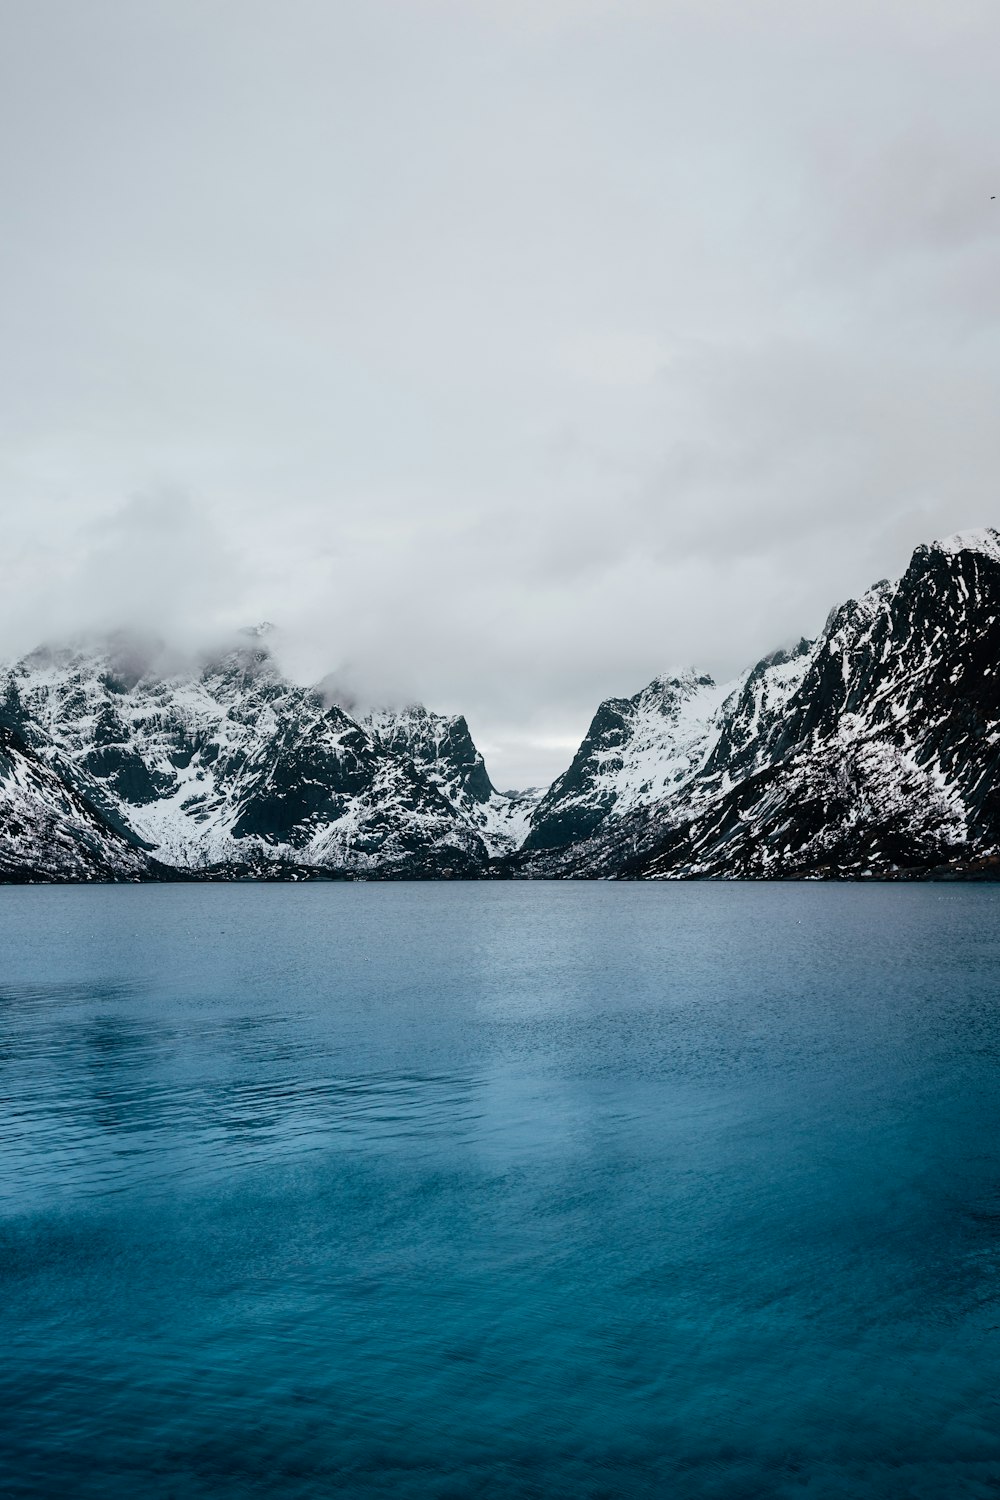 blue calm body of water and snow covered mountain under grey clouds at daytime